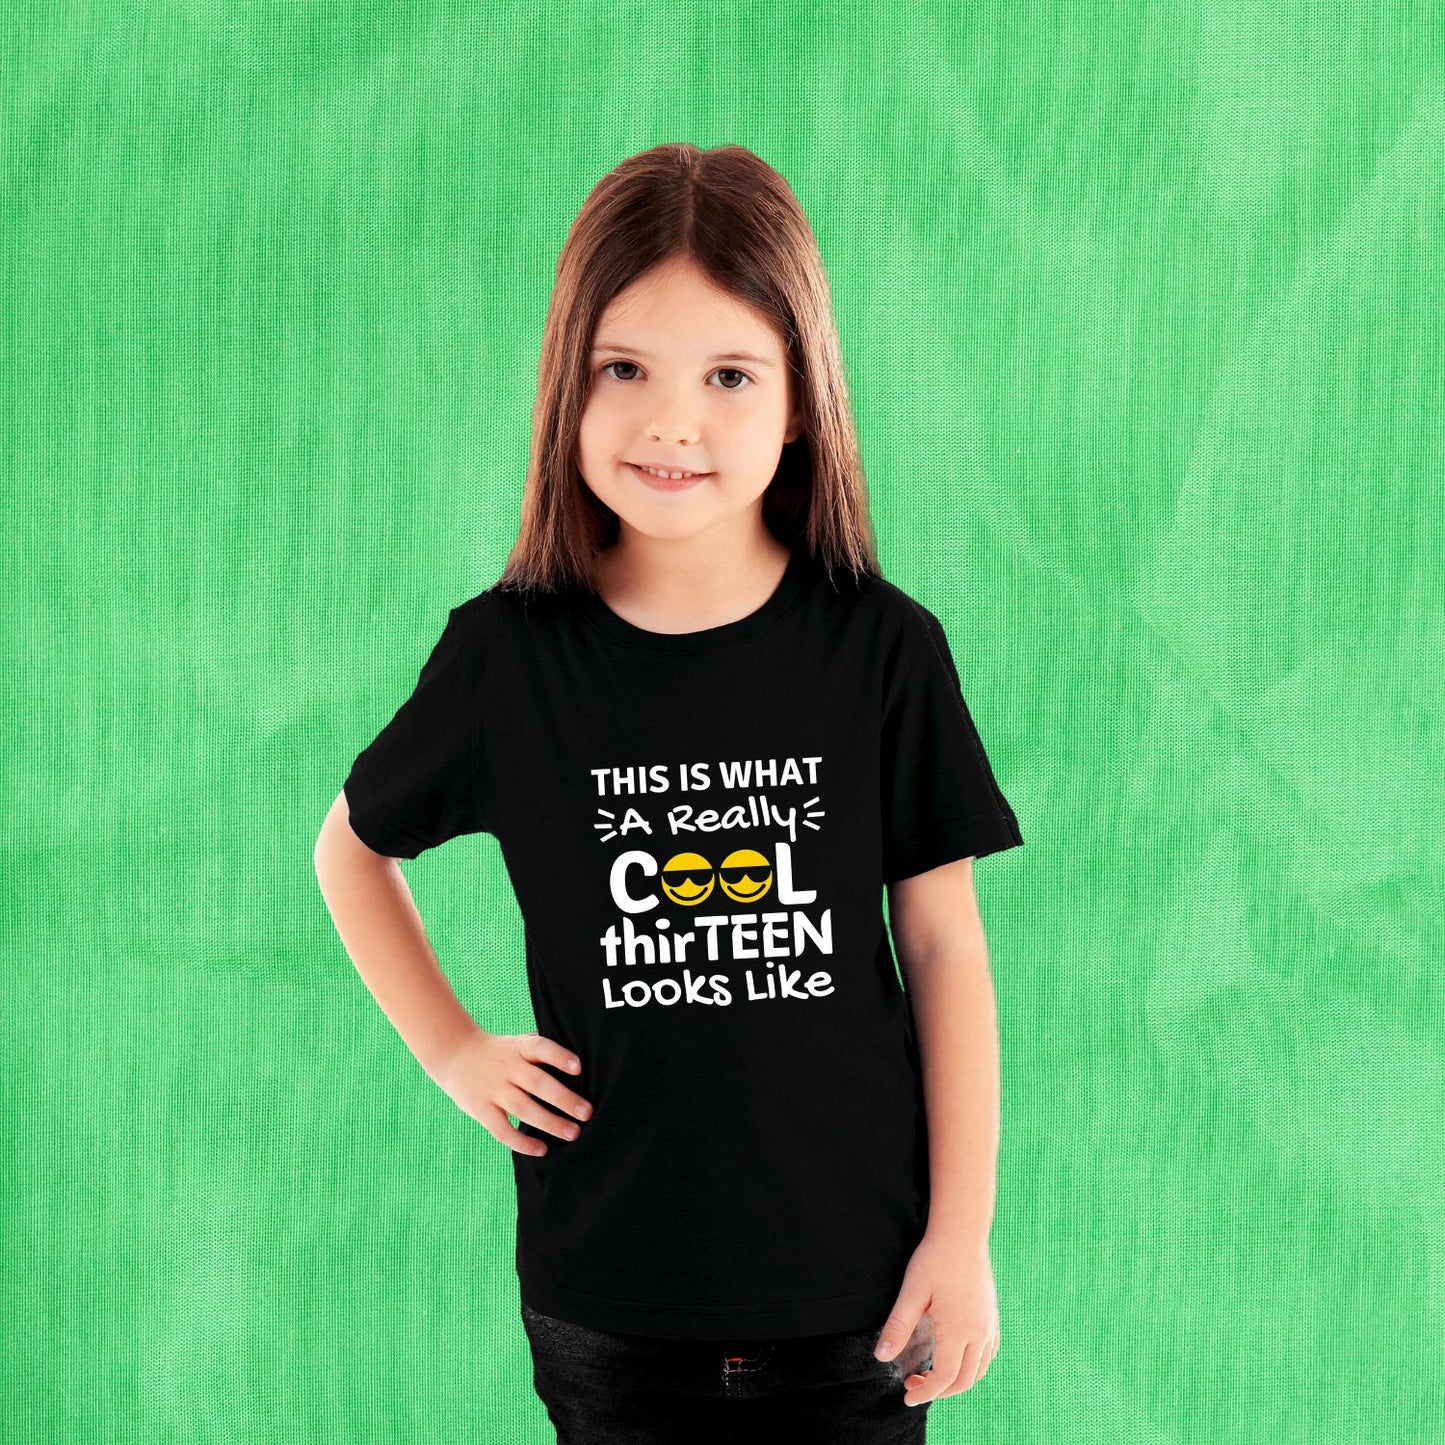 This is What a Really Cool Thirteen Looks Like Teenager T-Shirt for Boys and Girls - T Bhai